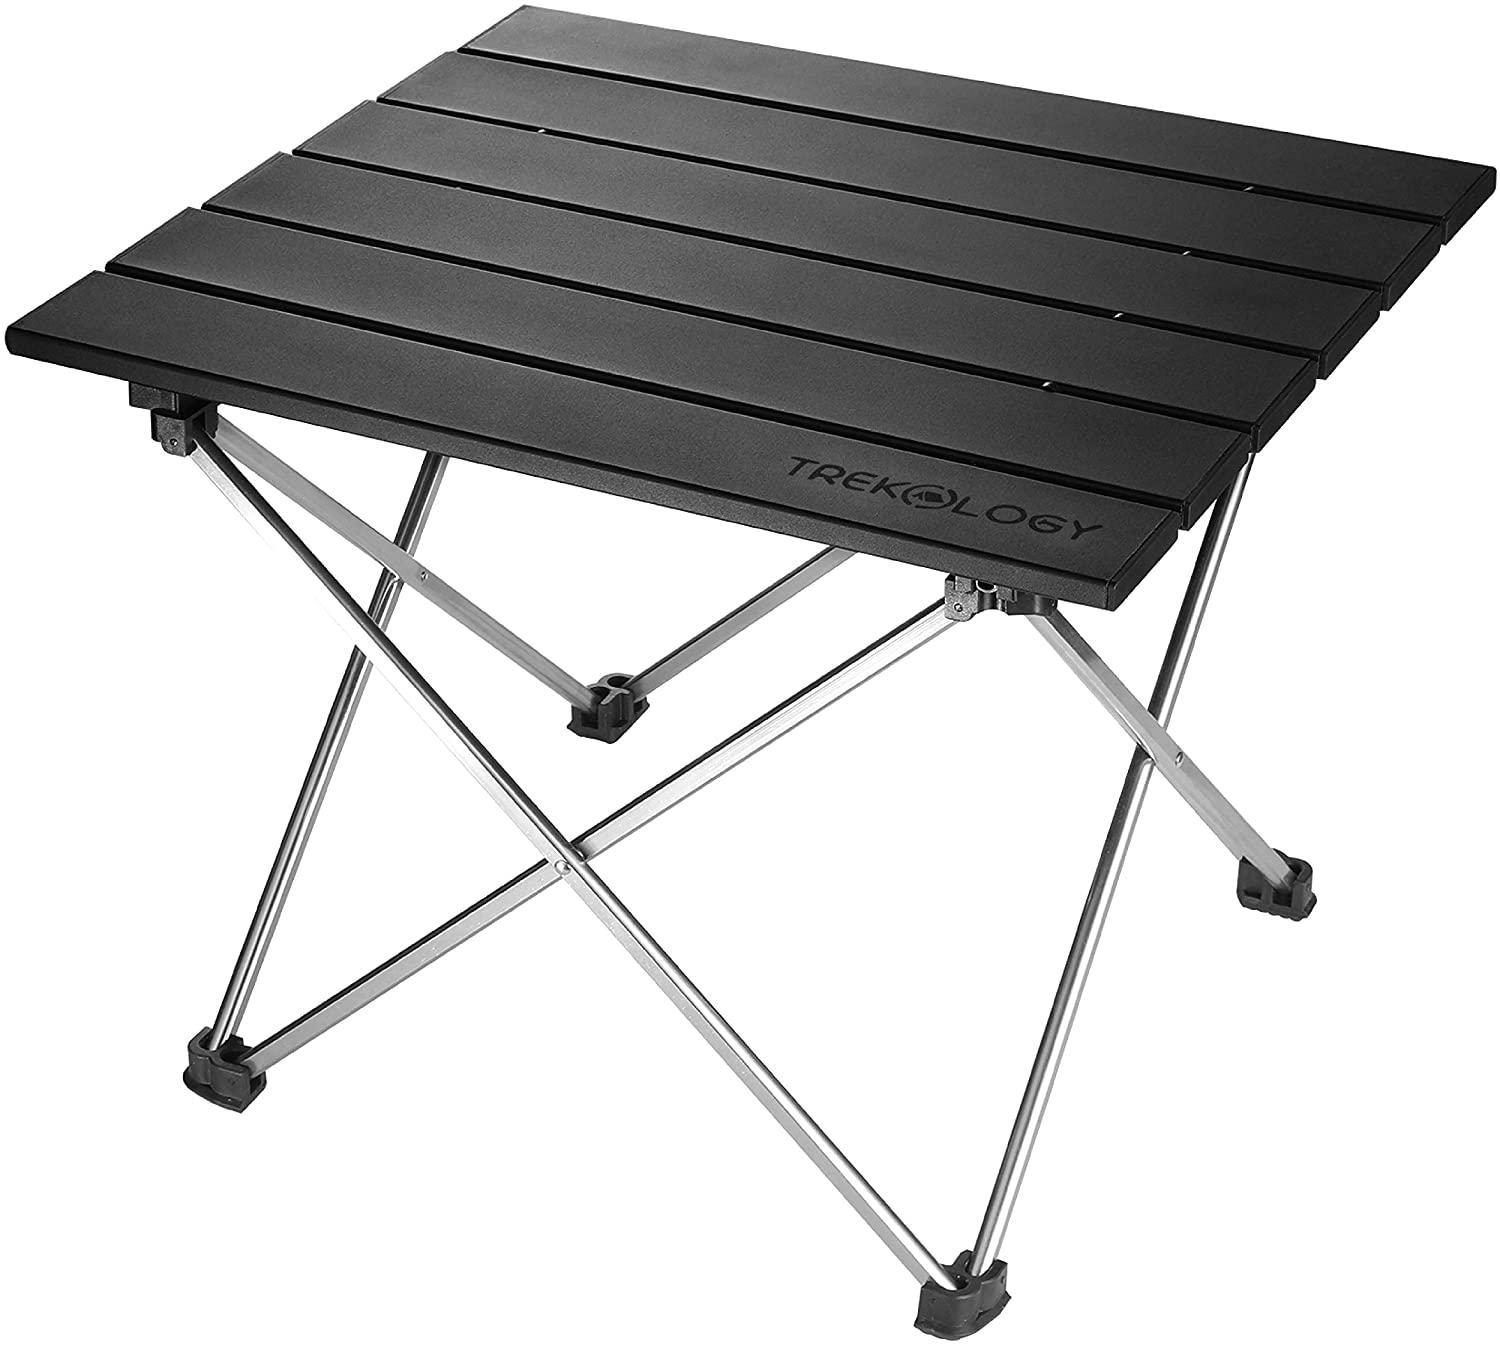 Camping Folding Portable Table with Carry Bag Fit for Picnic, BBQ, Beach, Fishing